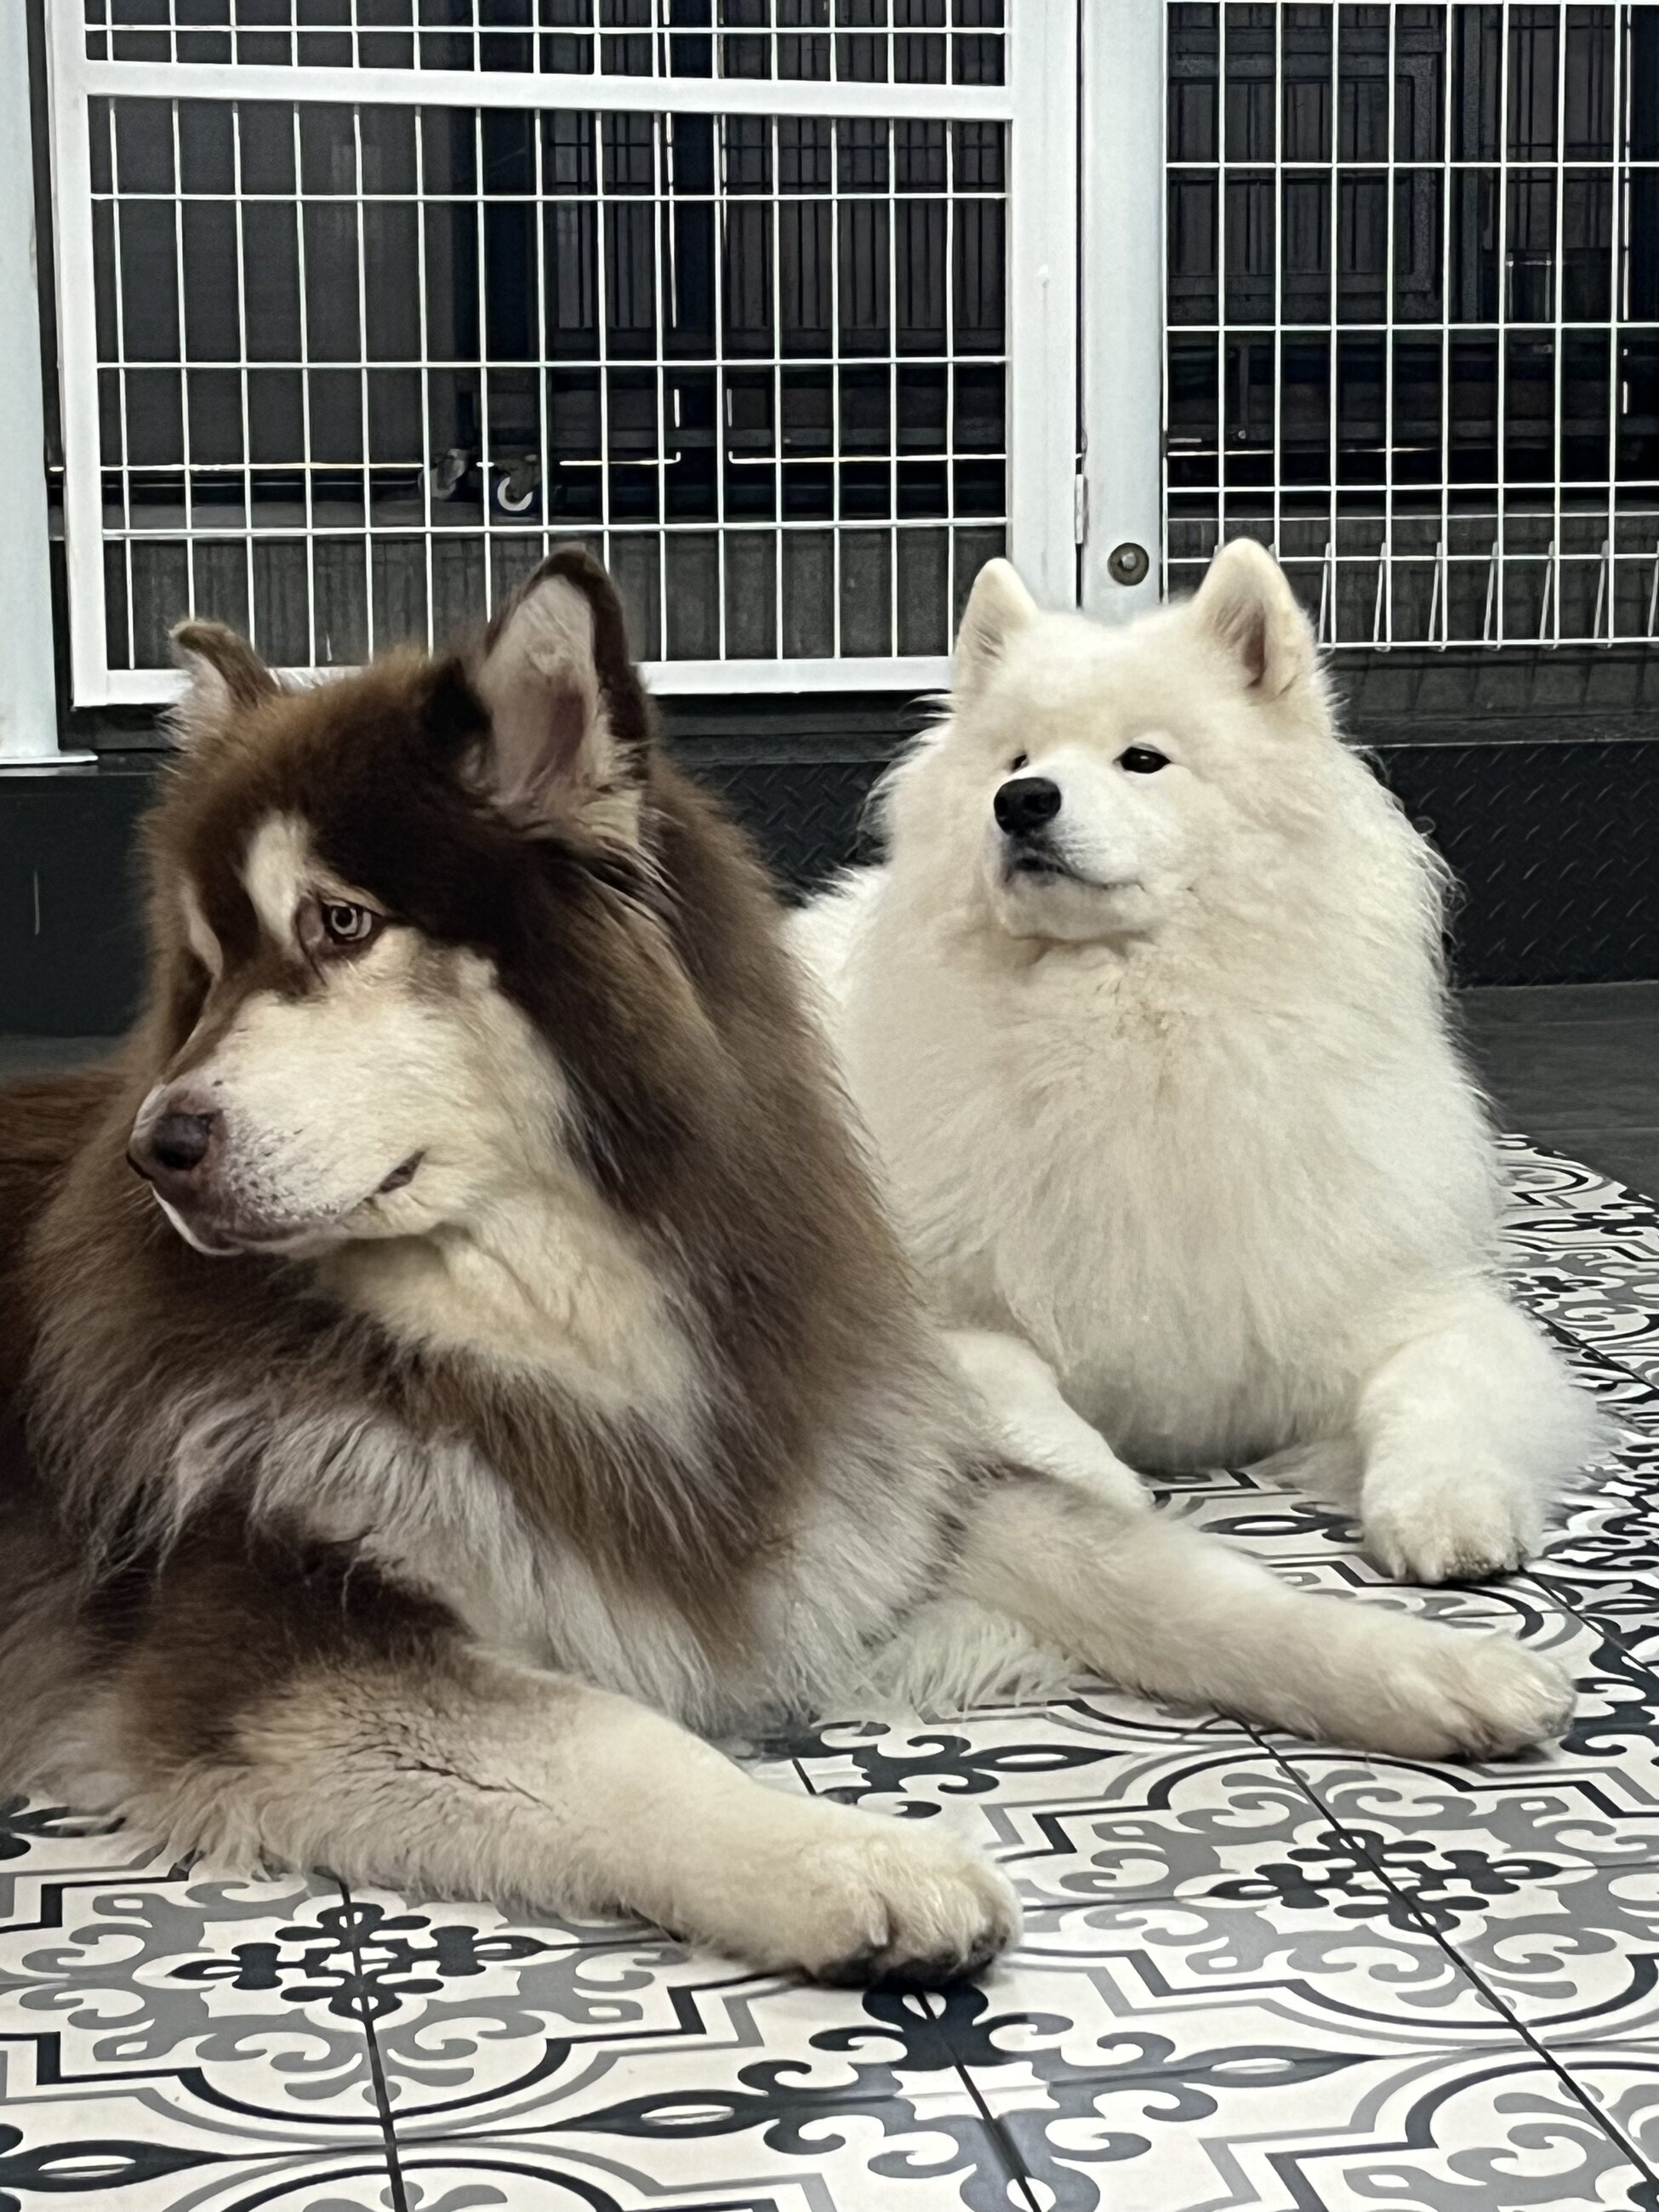 This was at the popular samoyed cafe in Hongdae and the dogs were very cute!